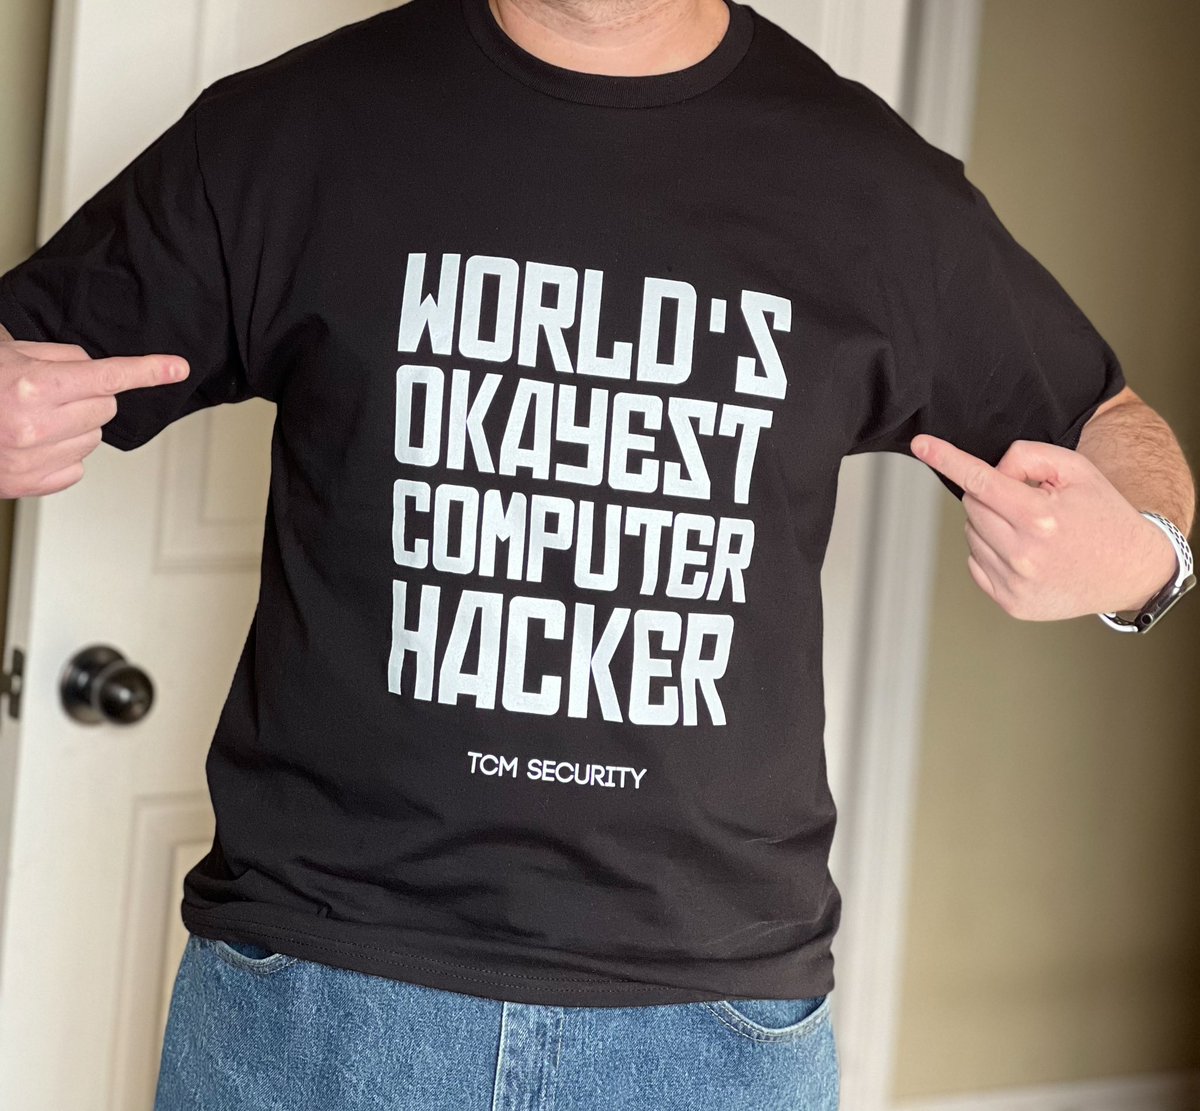 This spoke to me at a spiritual level. I had to get it. 🤣 cc: @thecybermentor @TCMSecurity